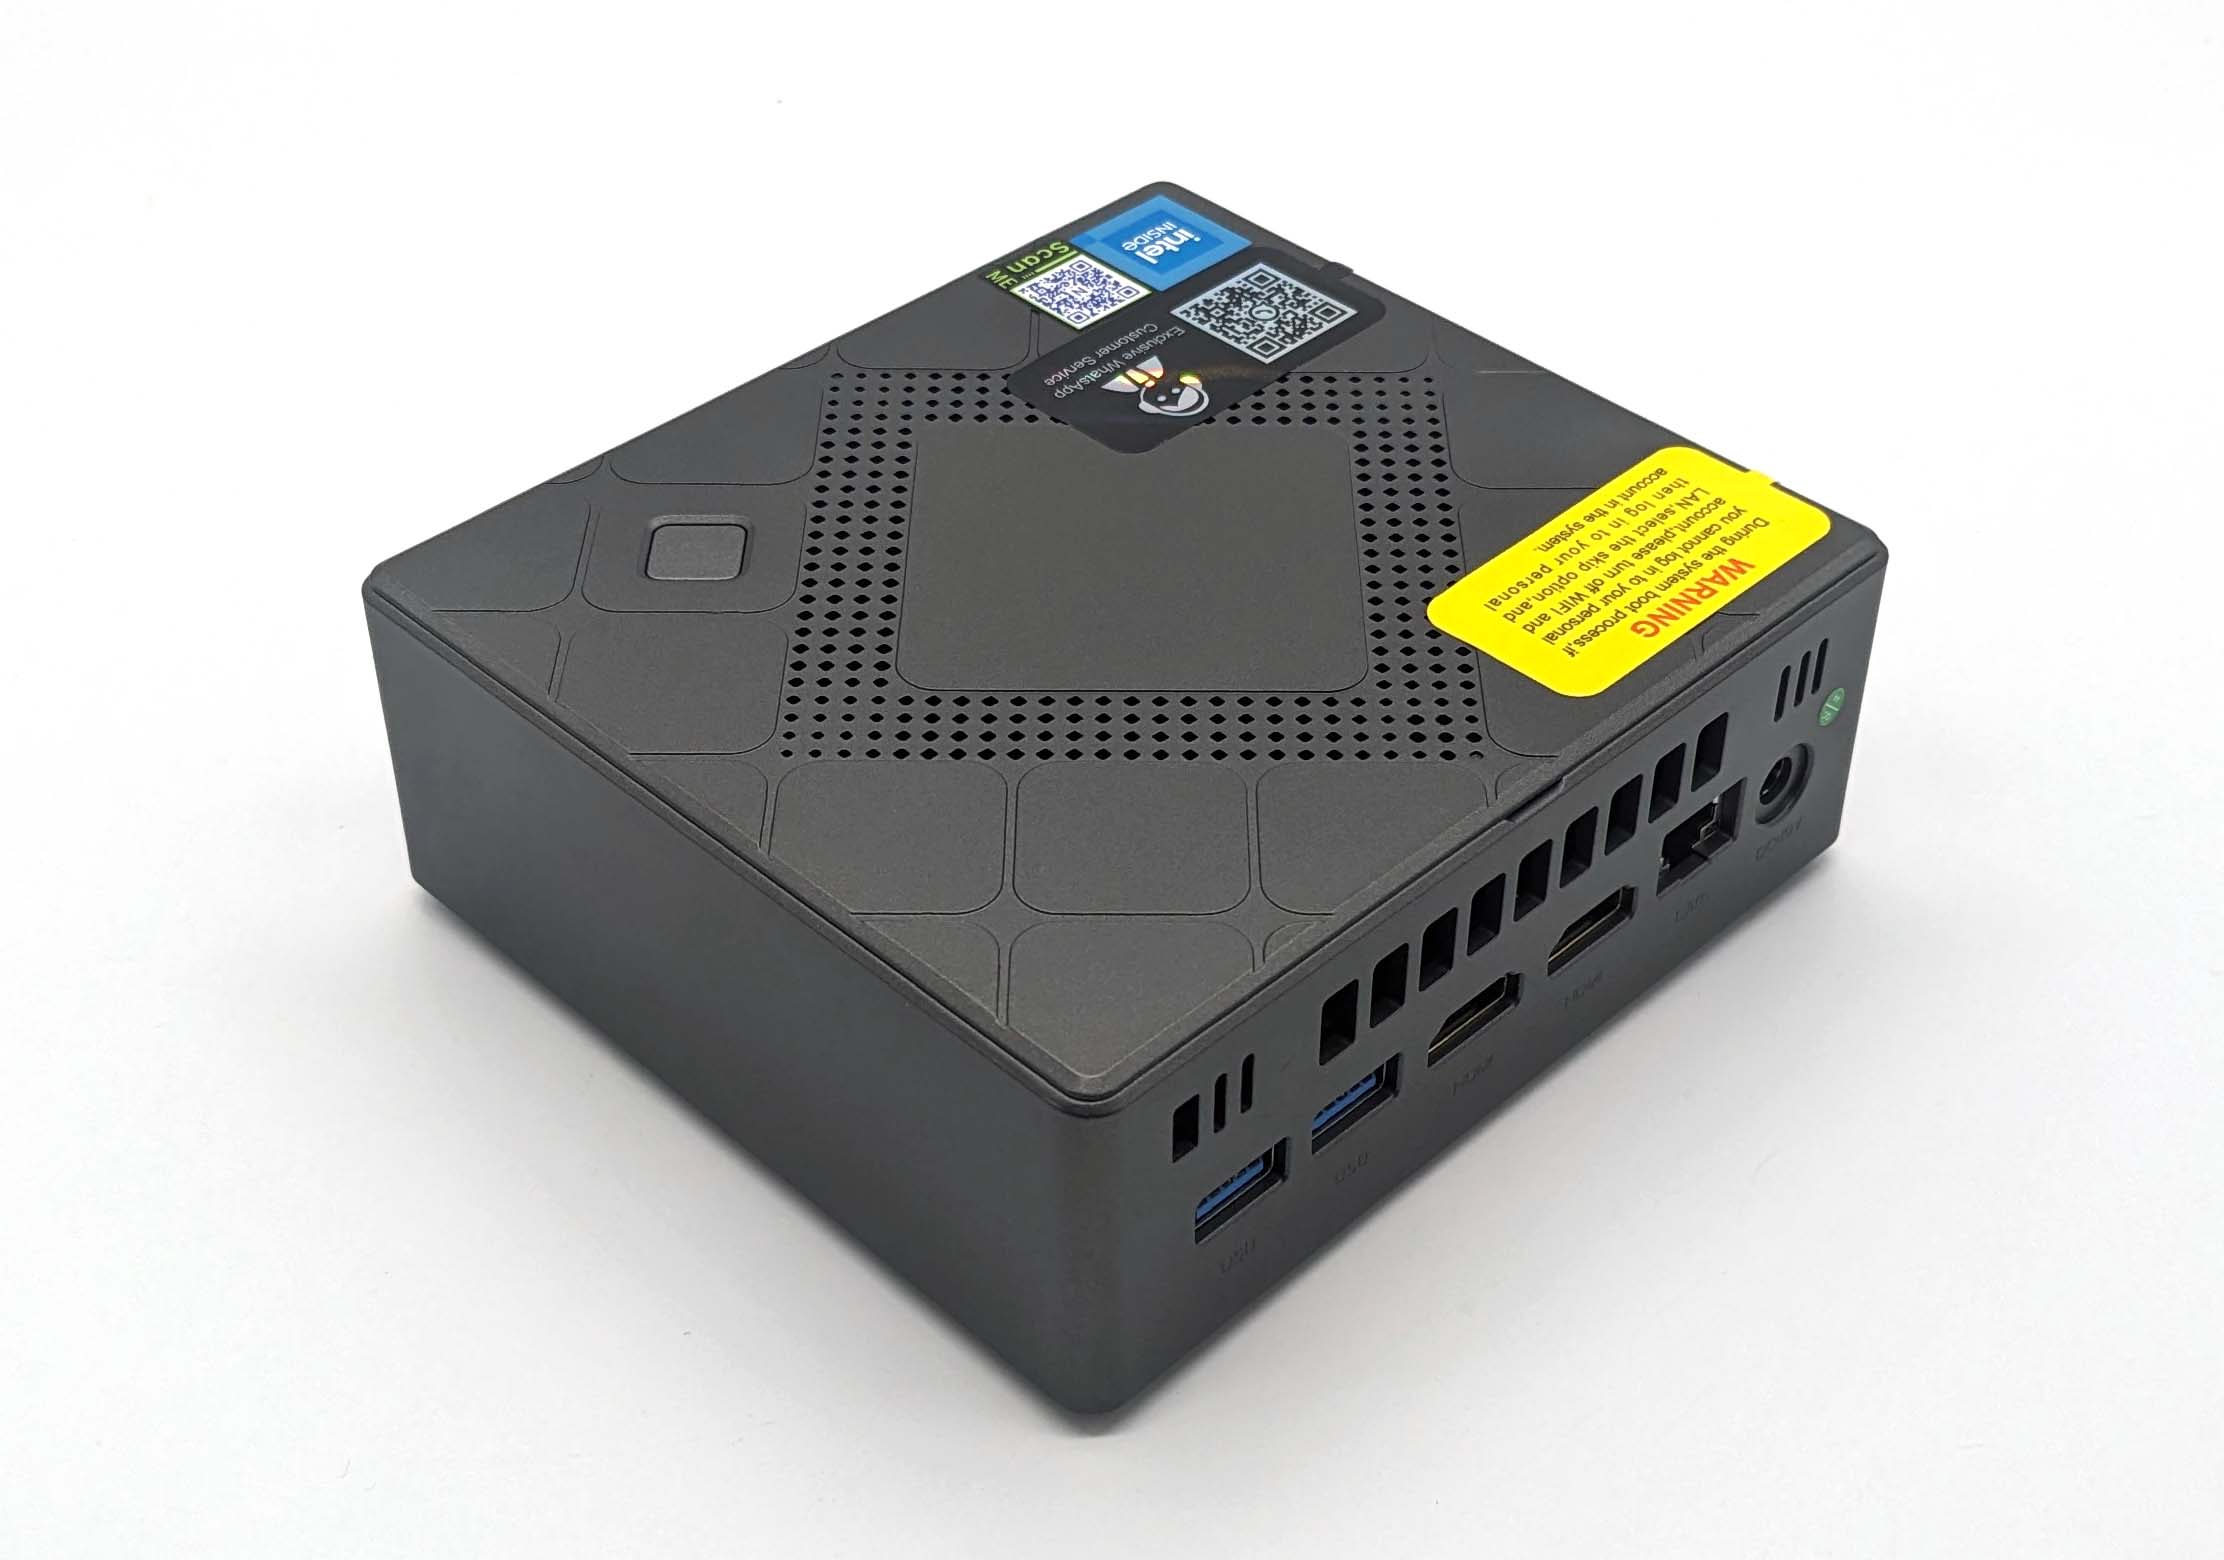 NiPoGi CK10 Mini-PC in test - fell short of expectations and more